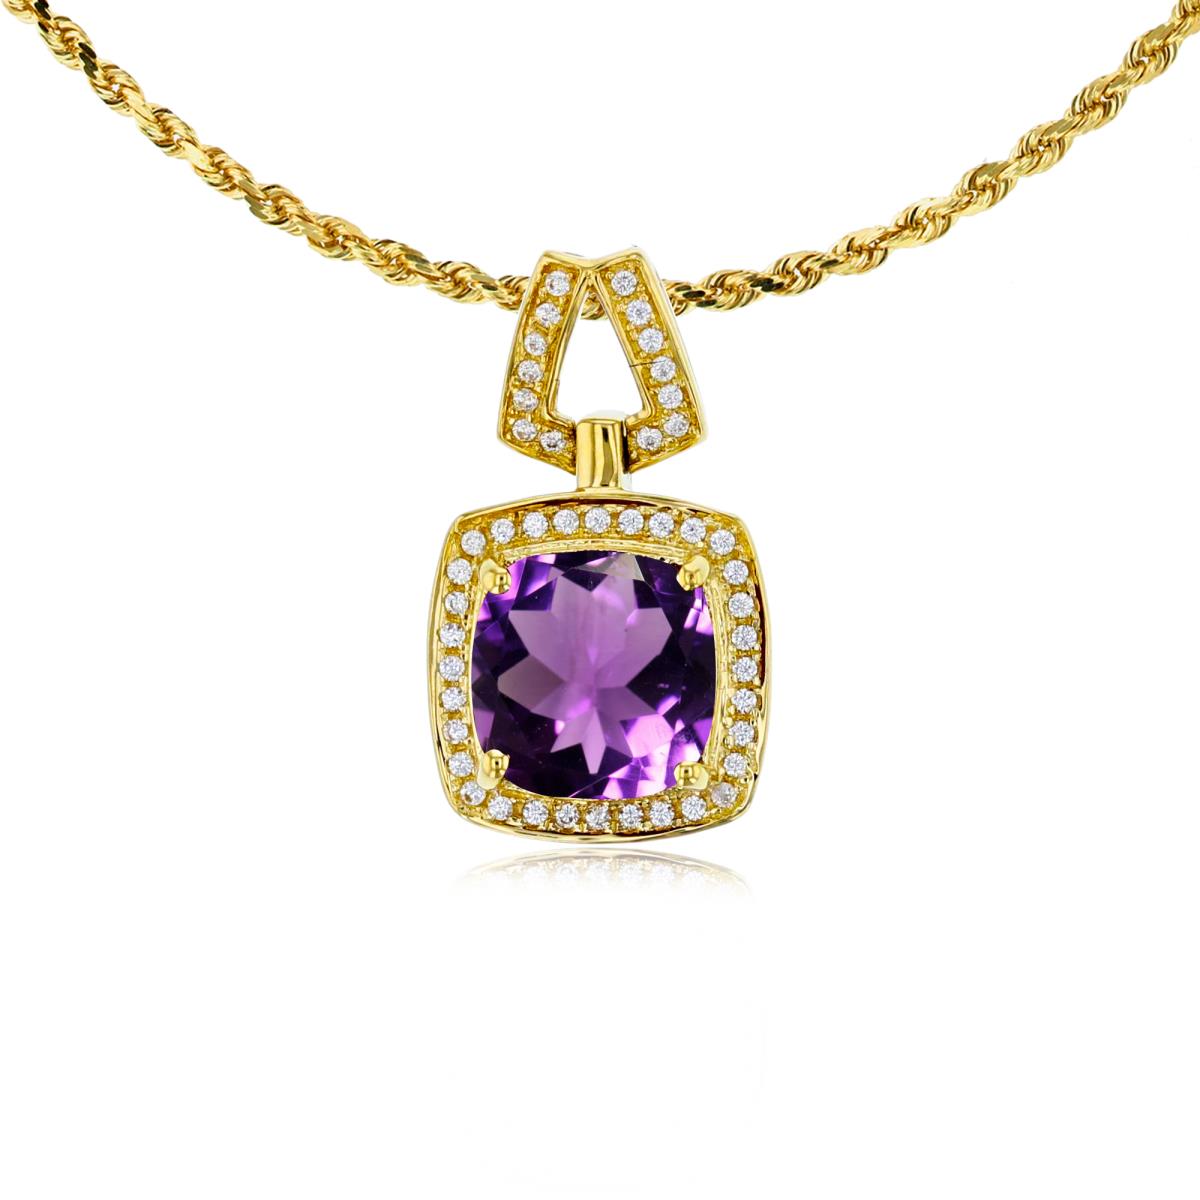 10K Yellow Gold 7mm Cushion Amethyst & 0.10 CTTW Diamond Halo 18" Rope Chain Necklace